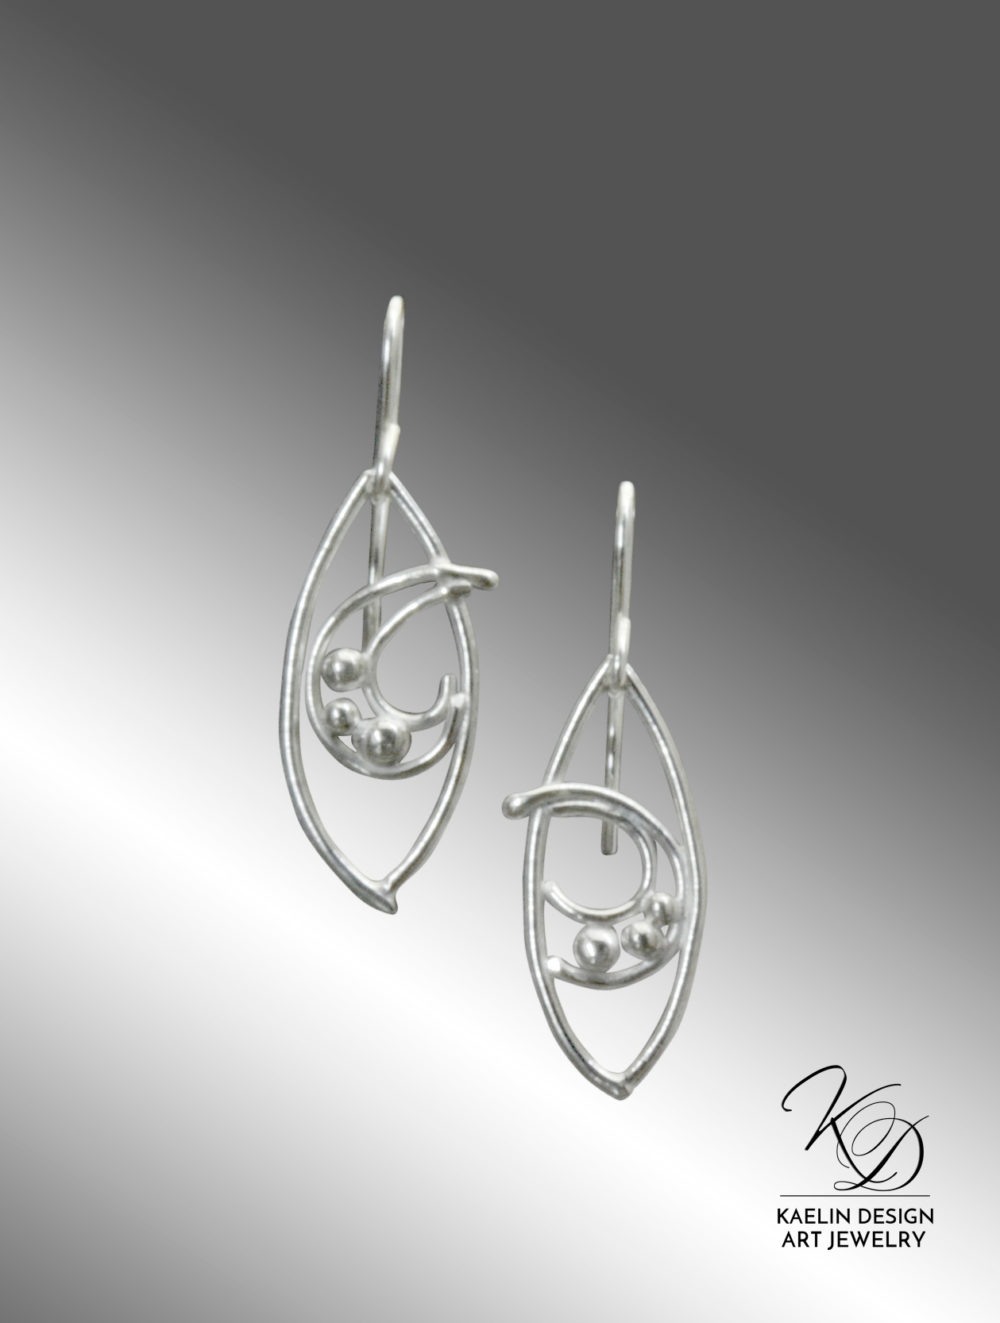 Rough Waters Hand Forged Sterling Silver Fine Art Earrings by Kaelin Design